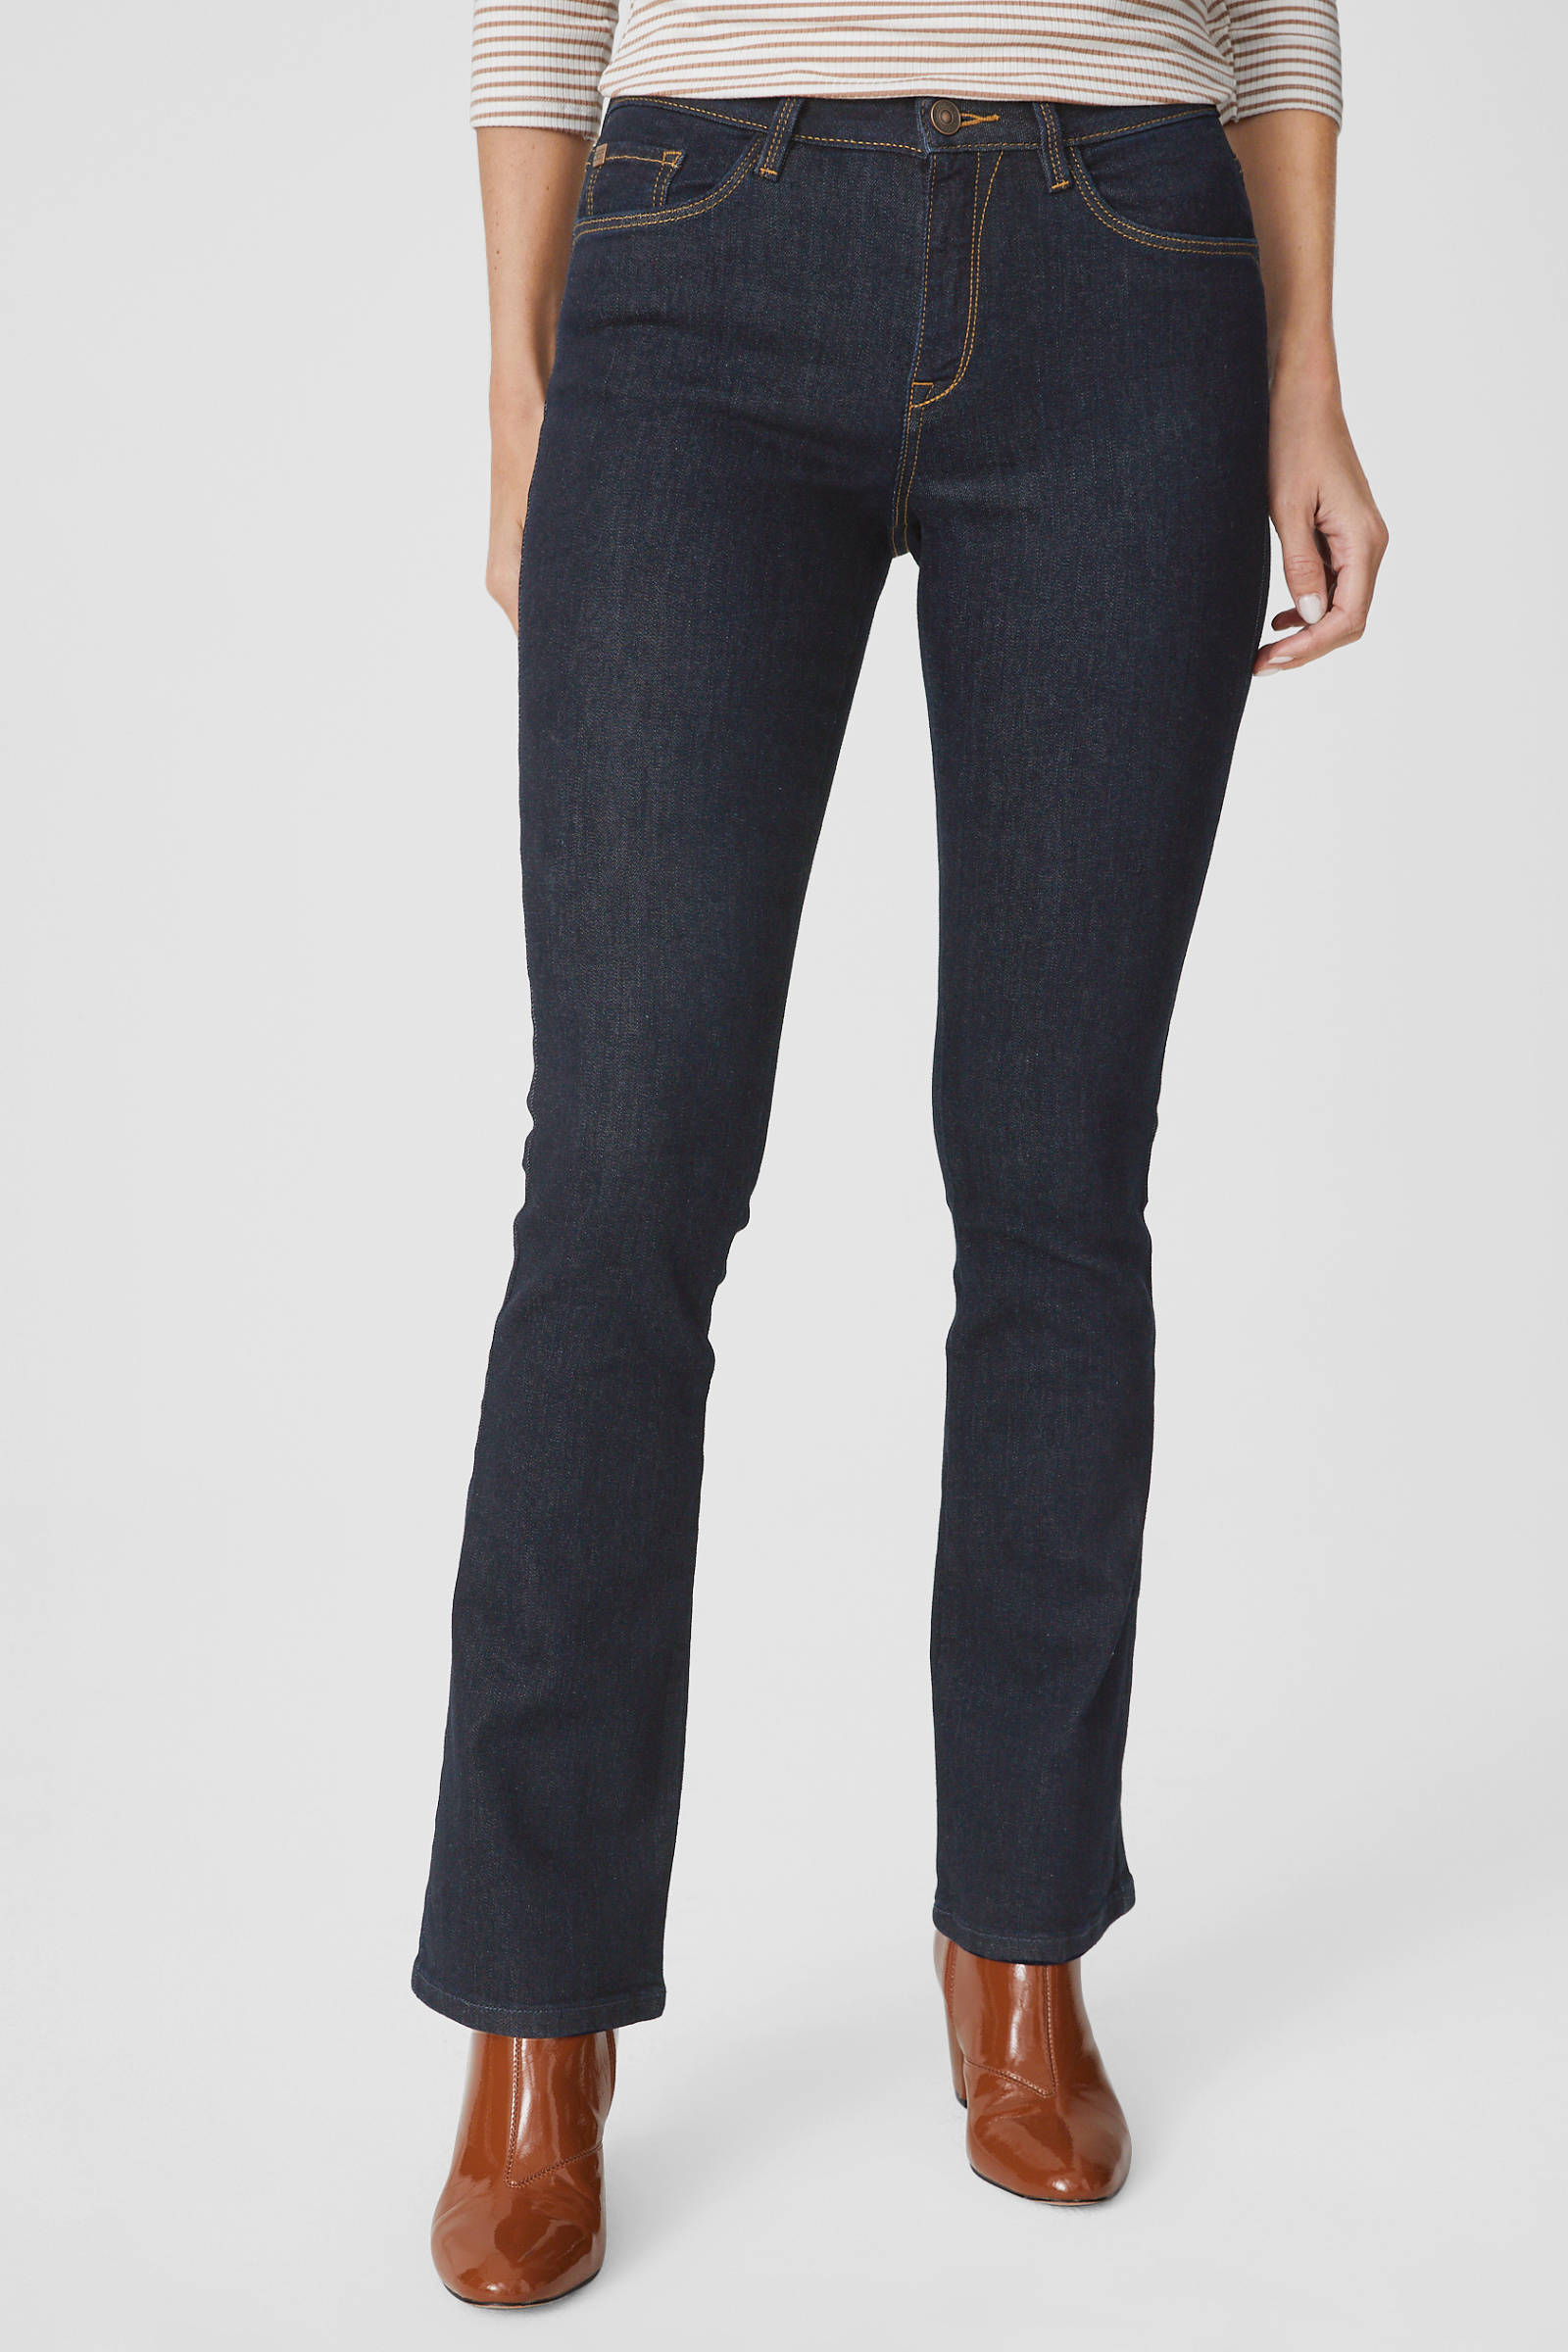 c&a flared jeans